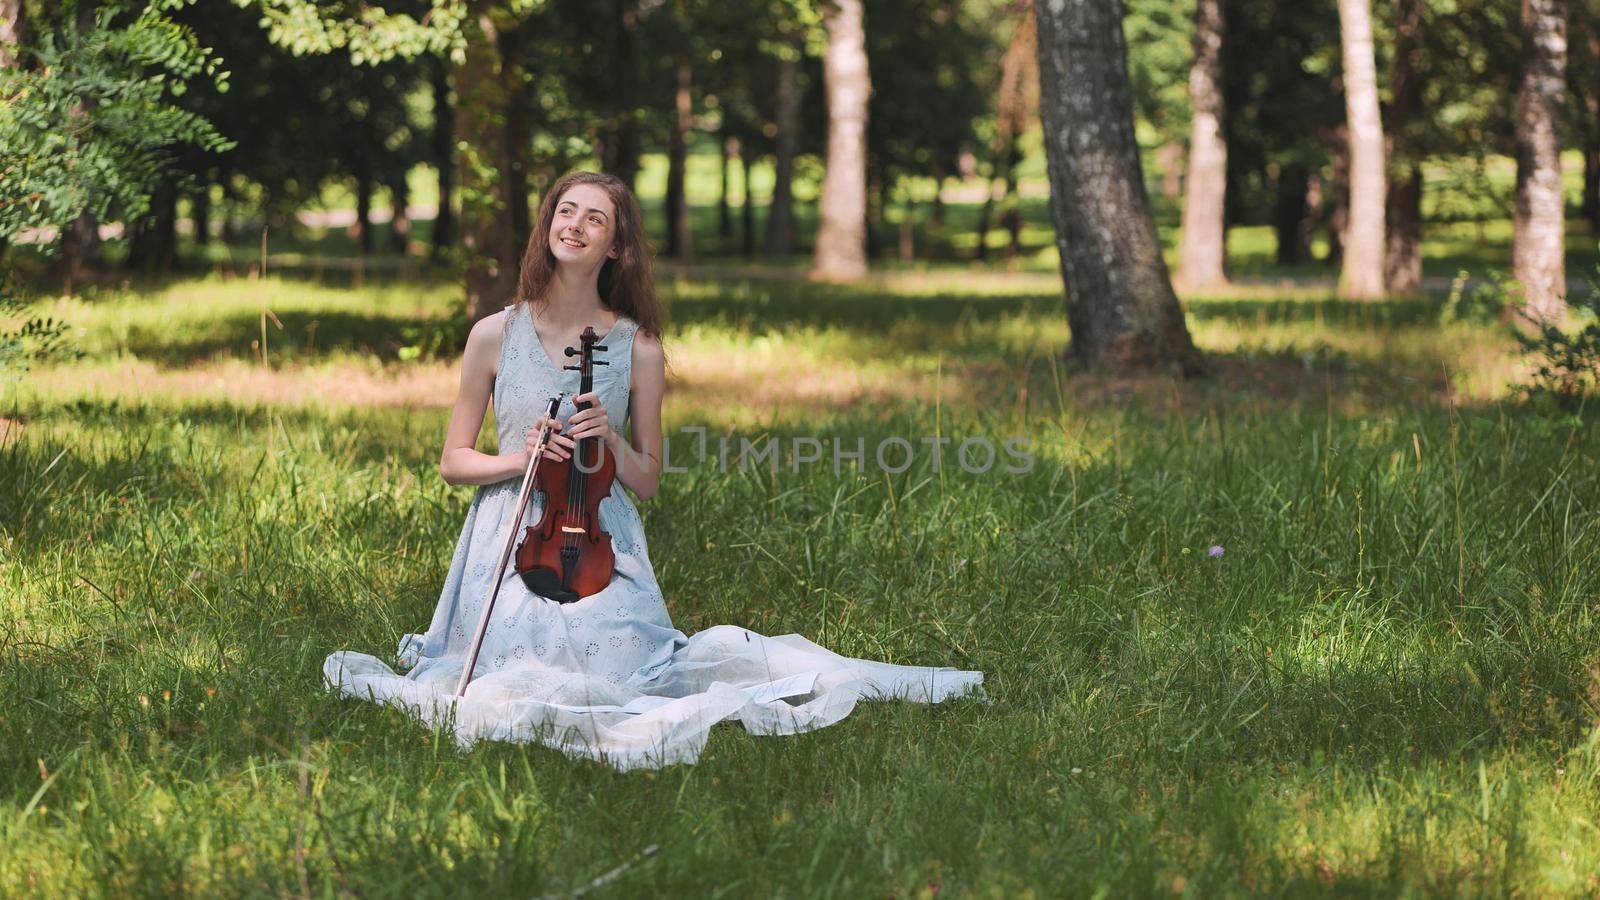 A girl sits with a violin on the grass in a city park